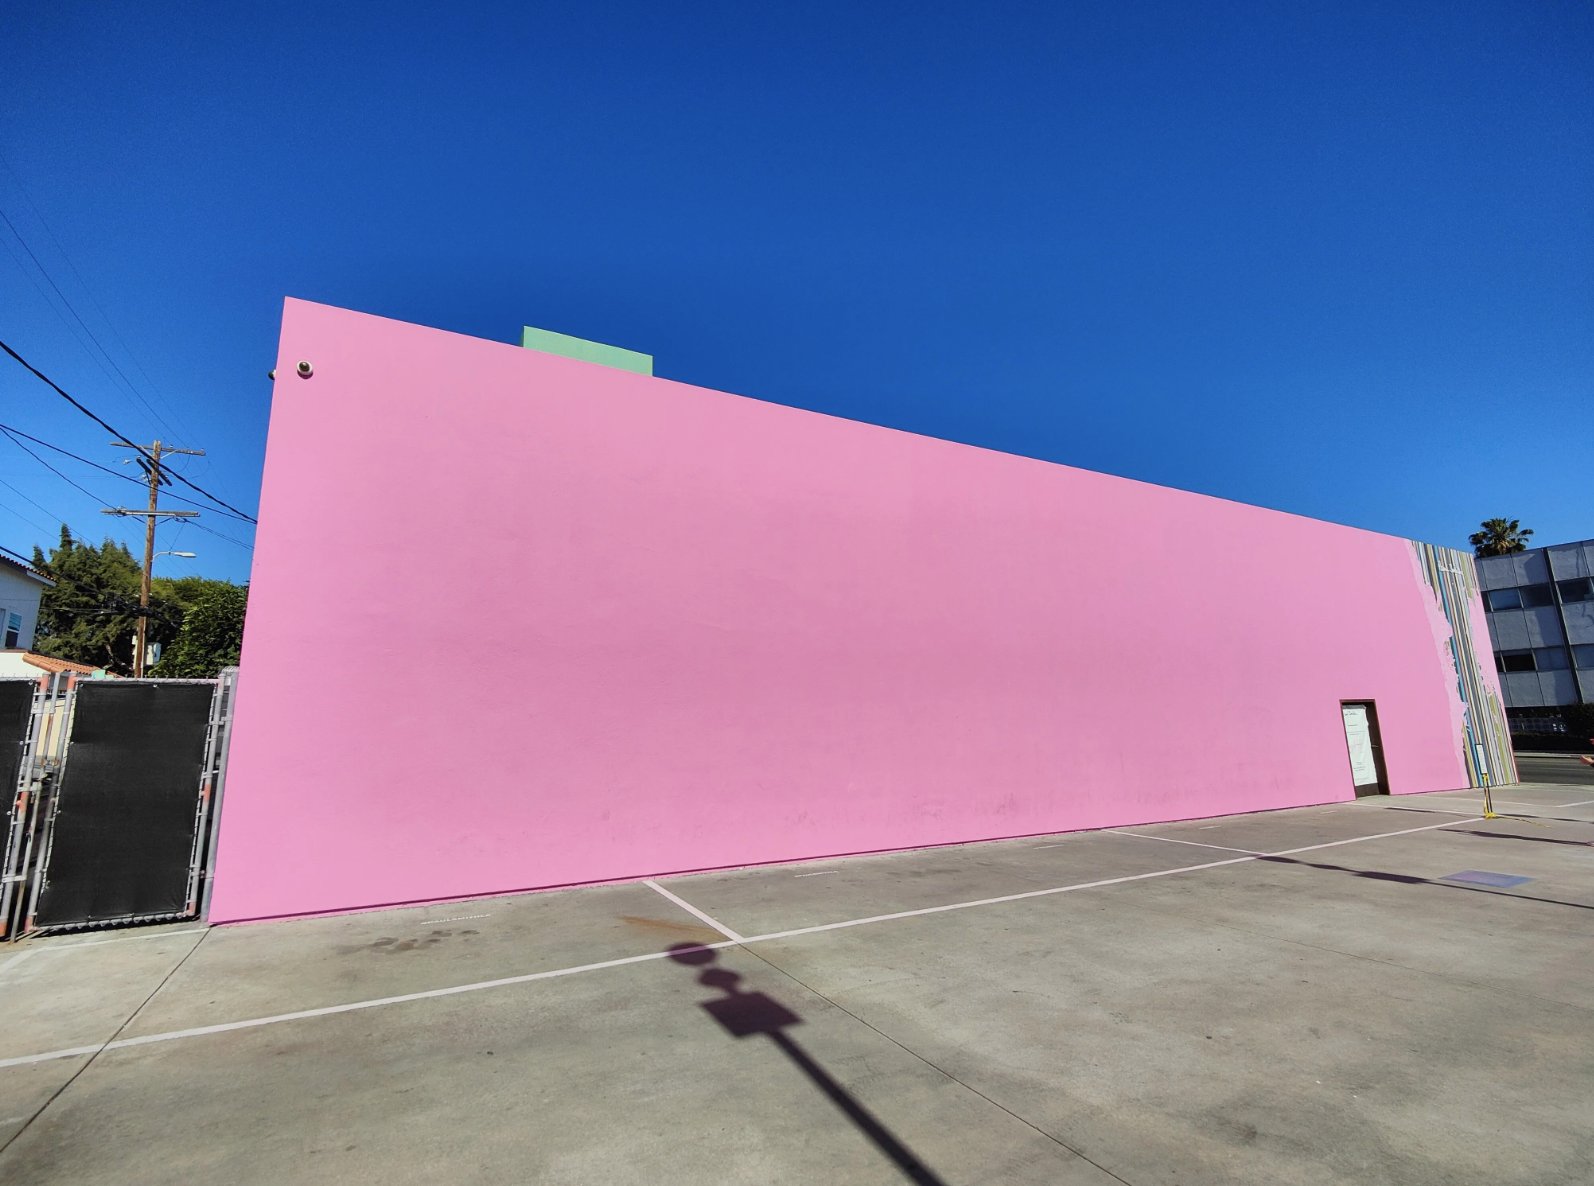 Large plain pink wall of a building with a clear blue sky, no people or text present